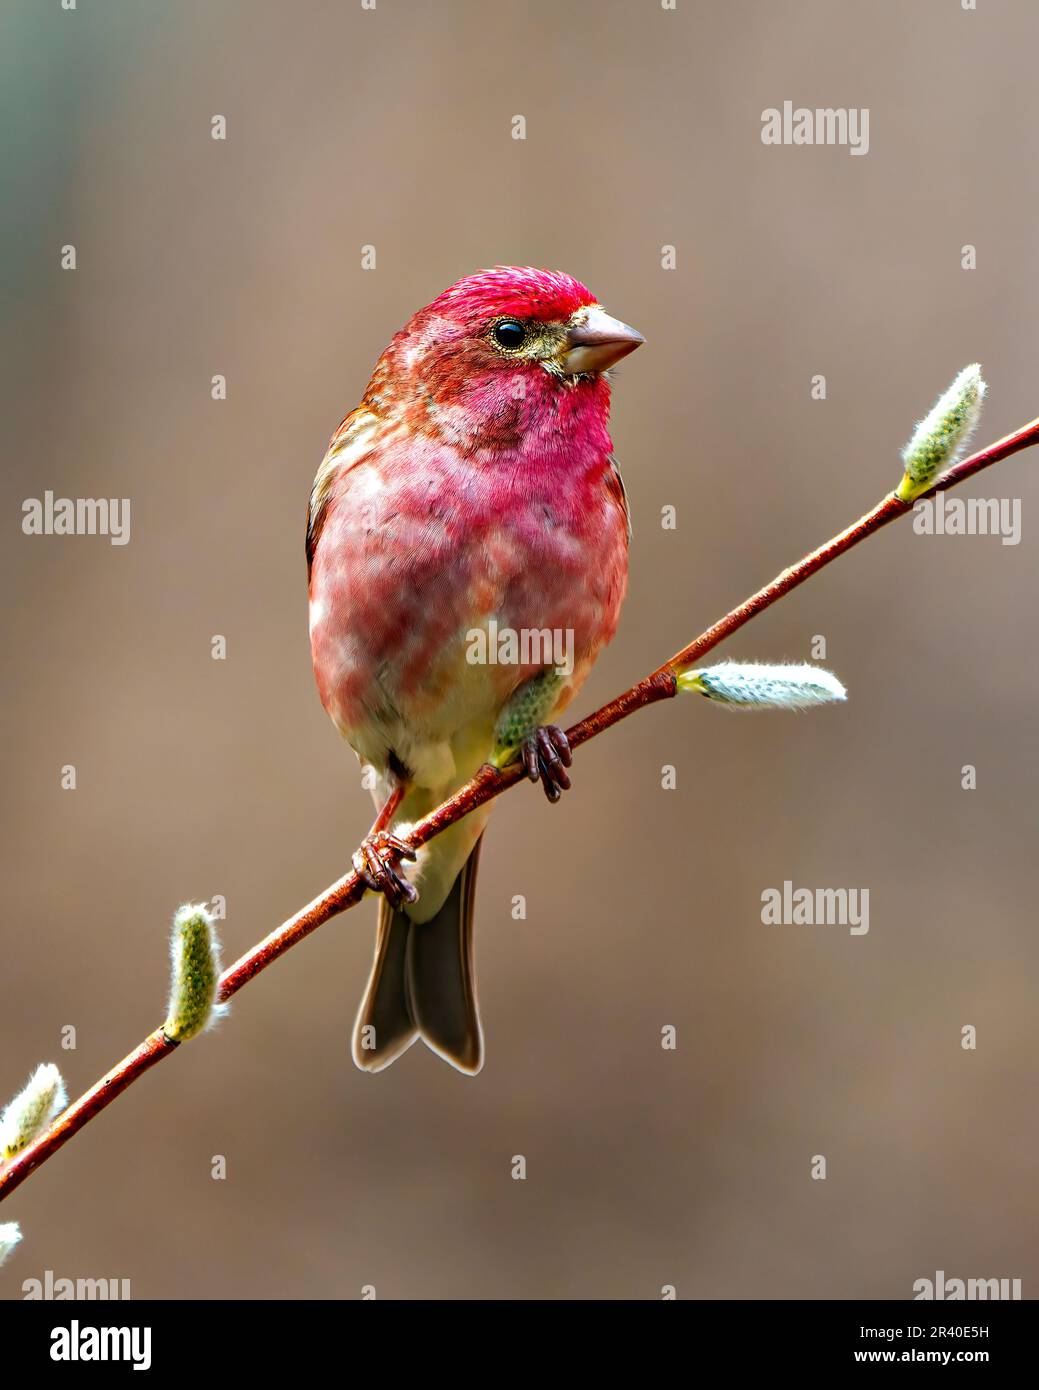 Purple Finch male close-up front view perched on a leaf bud branch with in its environment and habitat  displaying red feather plumage. Finch Picture. Stock Photo